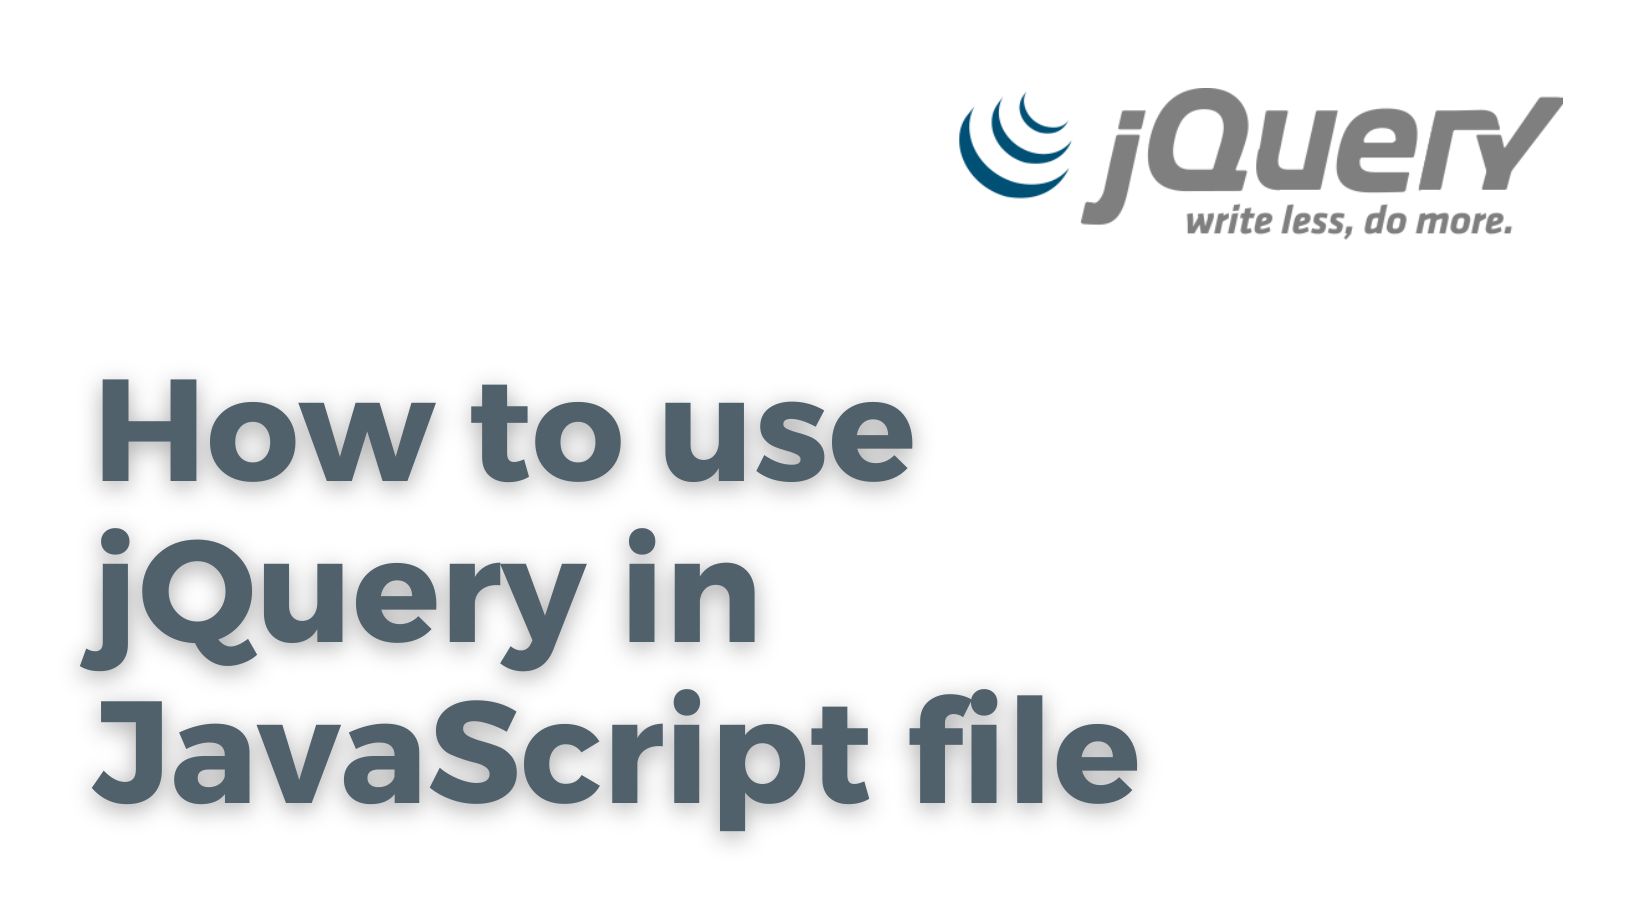 How to use jQuery in JavaScript file